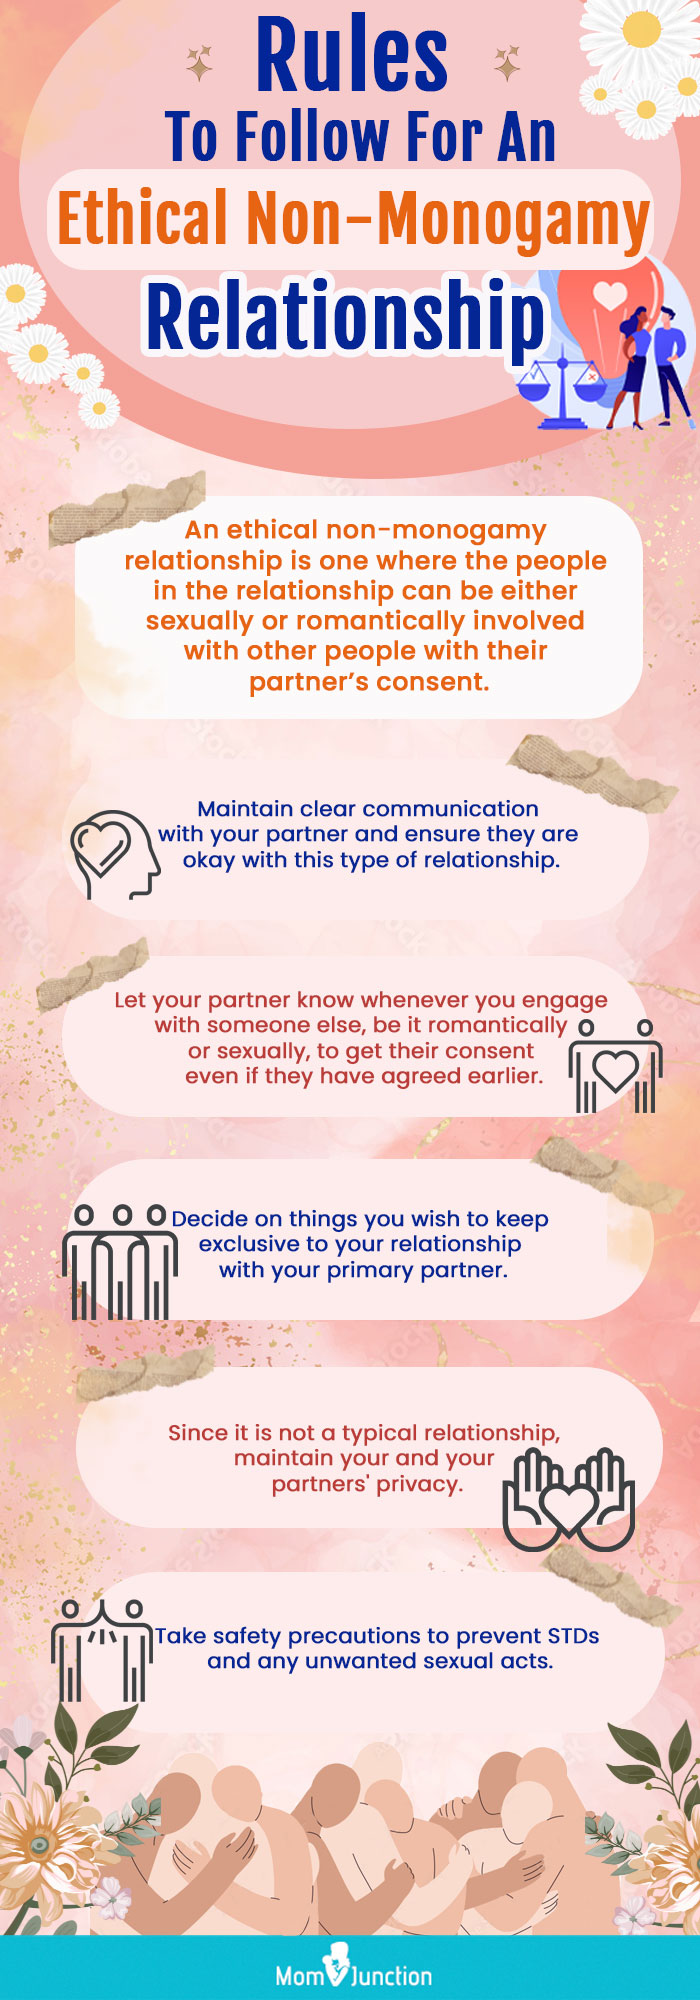 Ethical Non-Monogamy (ENM) Relationship Types And Rules photo